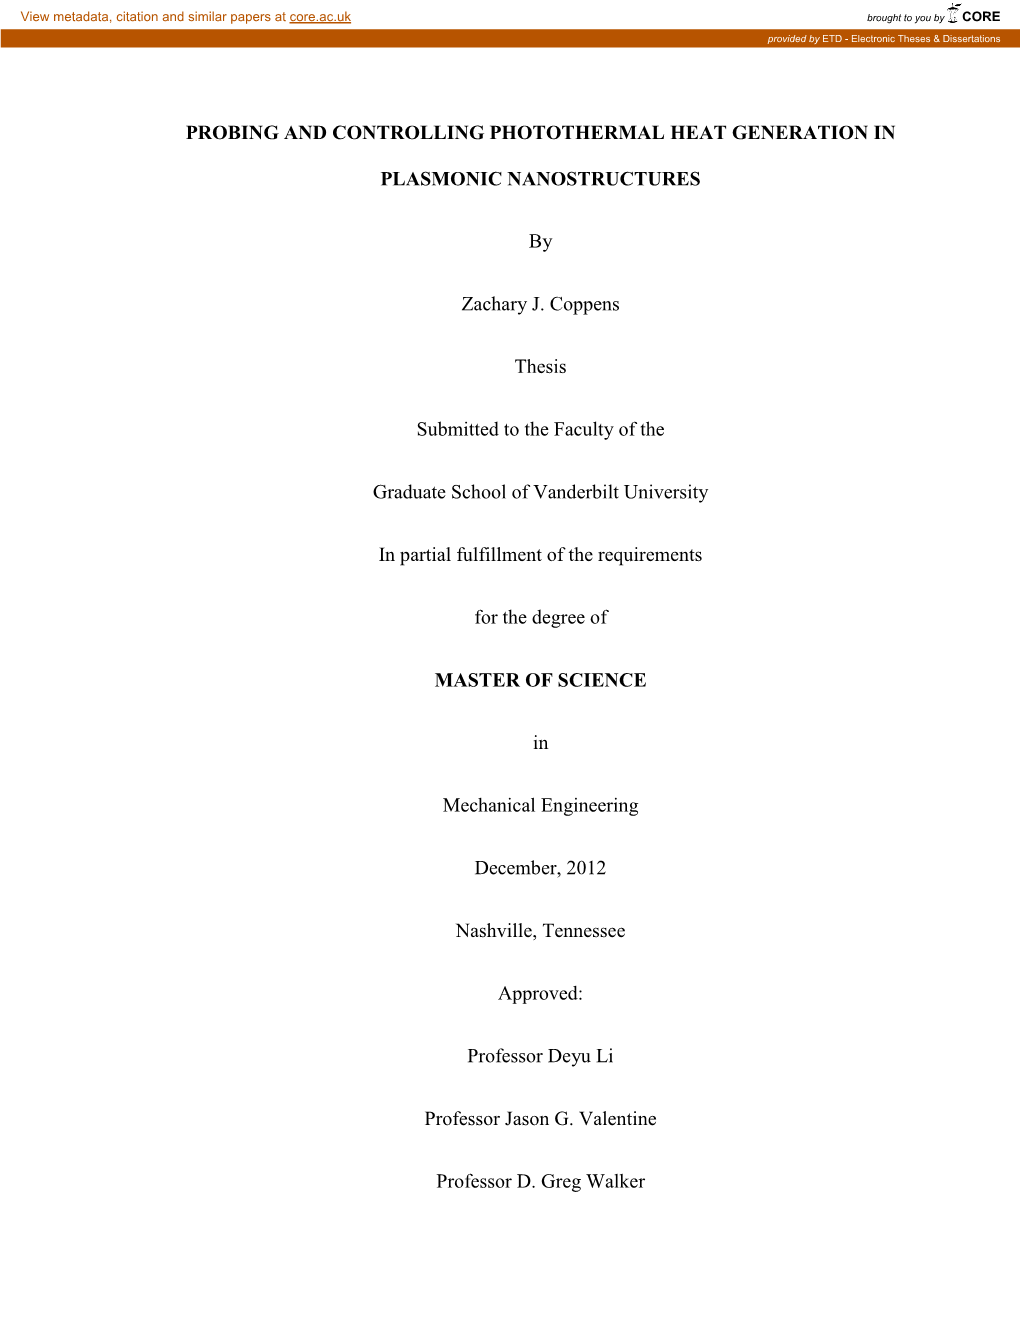 PROBING and CONTROLLING PHOTOTHERMAL HEAT GENERATION in PLASMONIC NANOSTRUCTURES by Zachary J. Coppens Thesis Submitted to the F